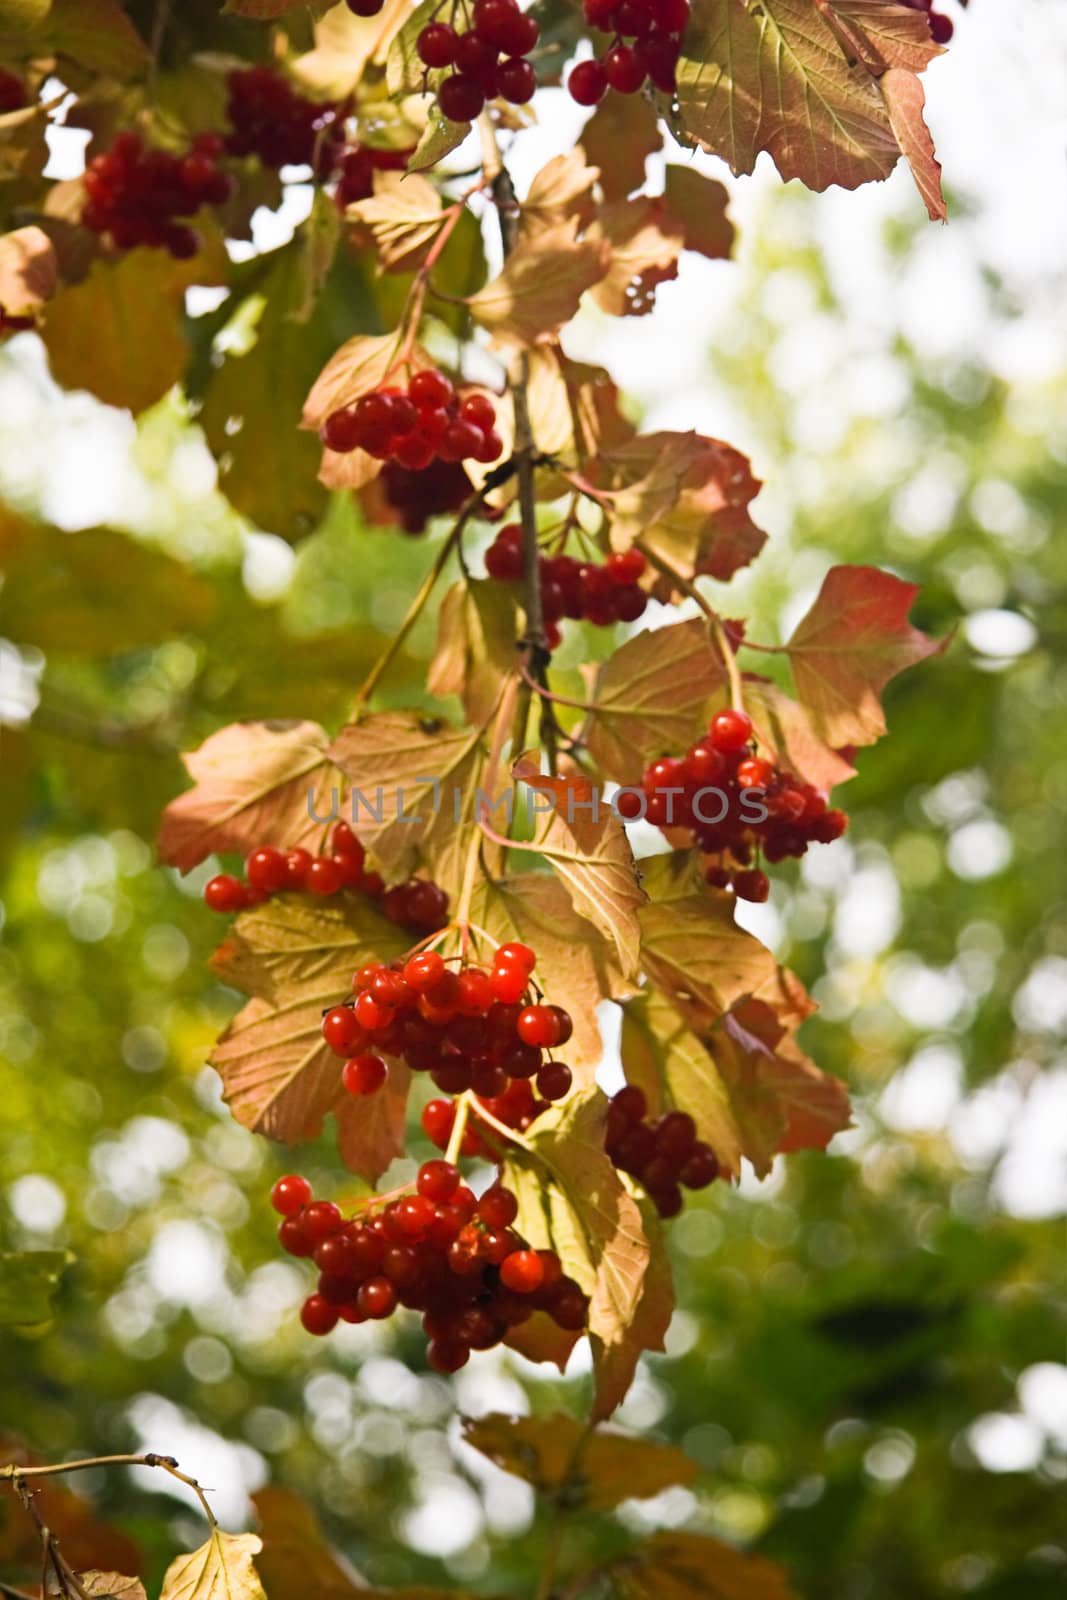 Red berries and autumn leaves by Colette